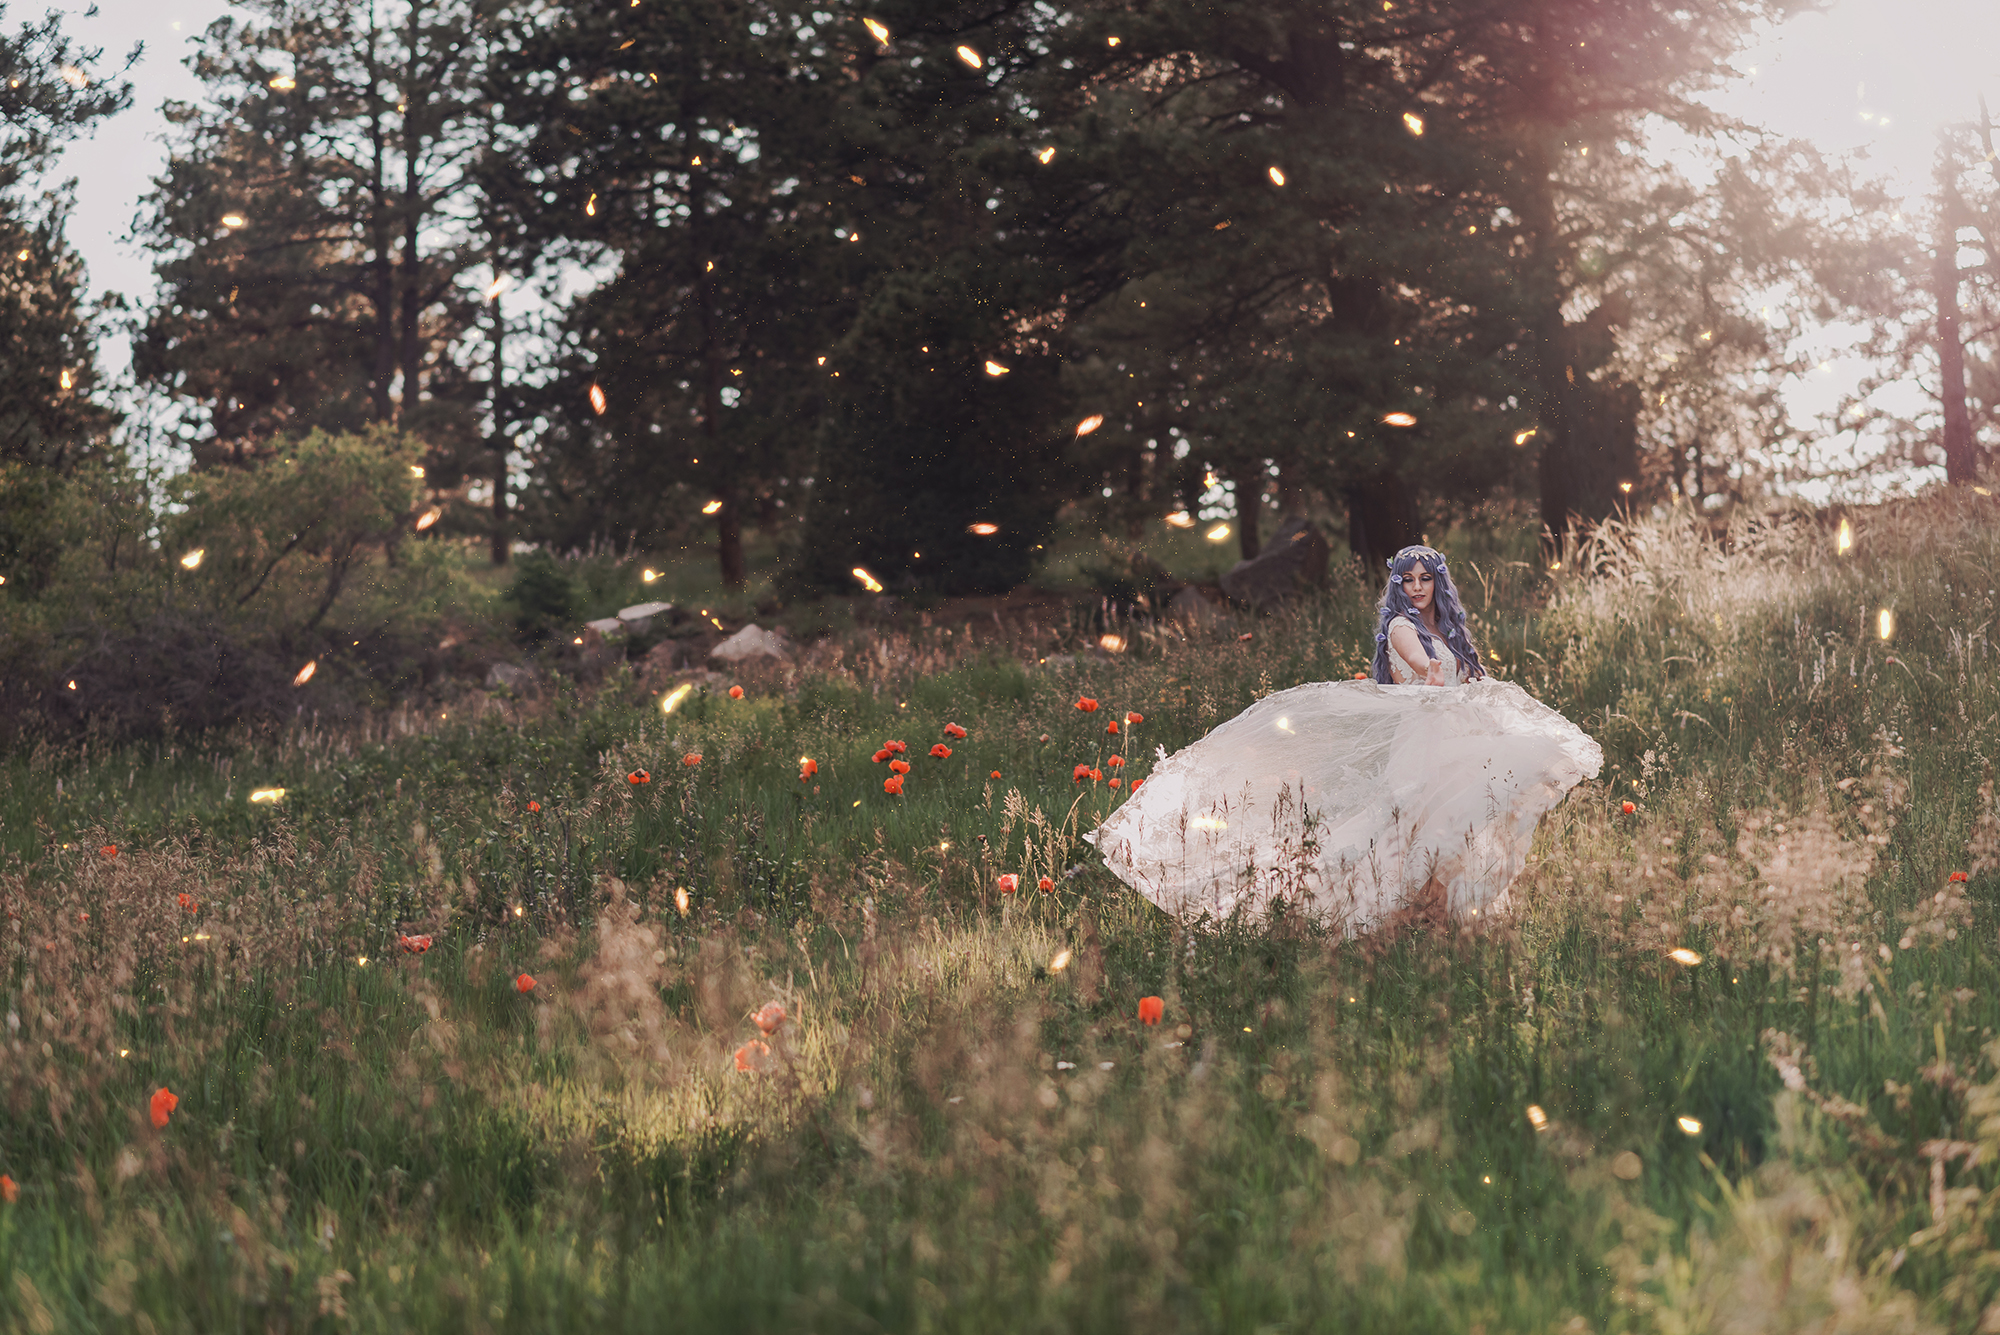 Kendra Colleen Photography takes fantasy bridal photo of a woman with purple hair spinning in a wedding dress in a field of wildflowers in Boulder Colorado.